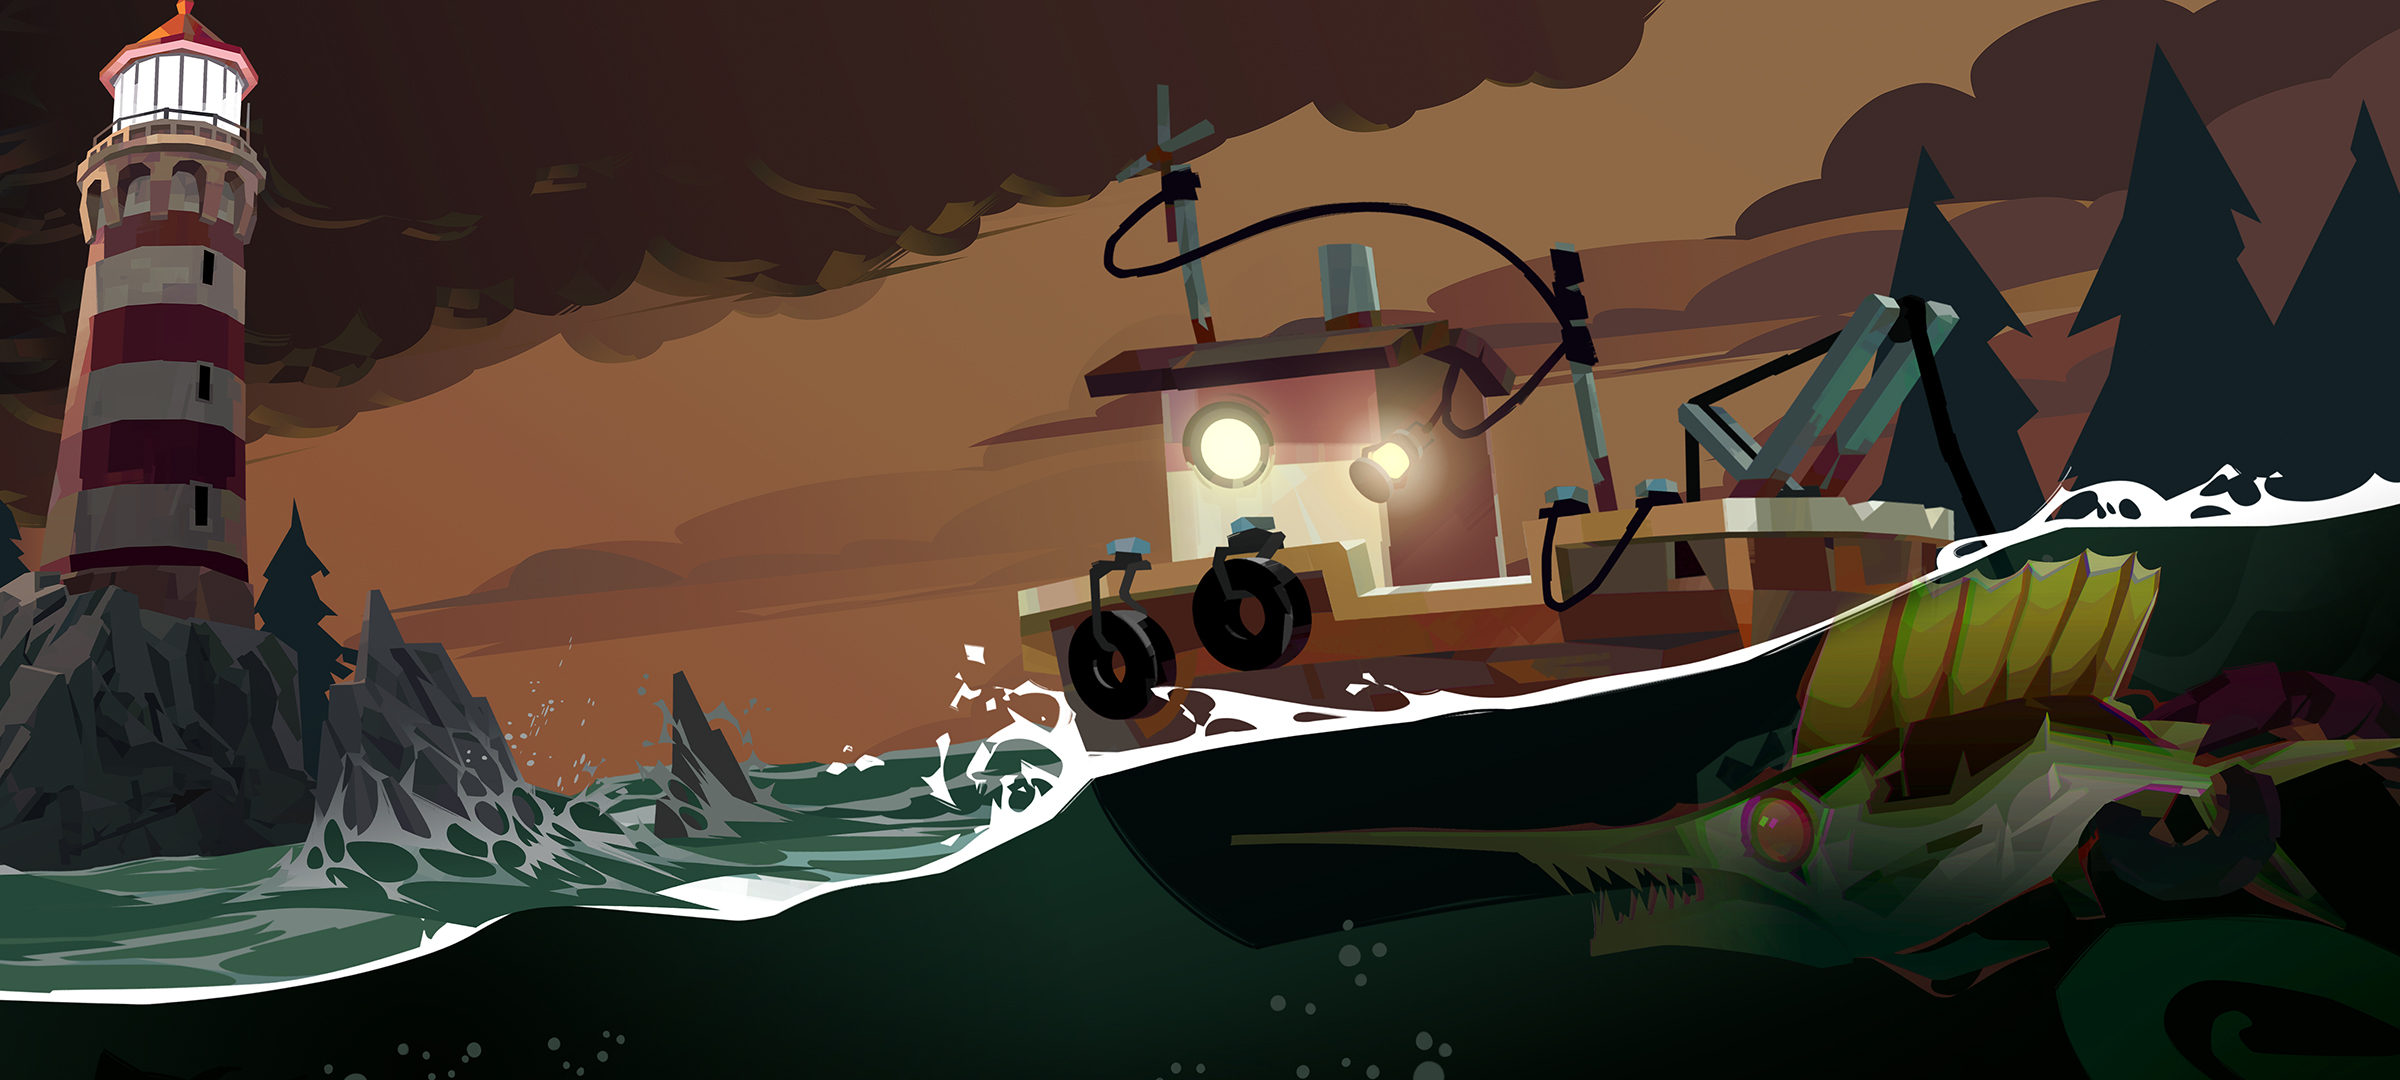 Artwork from Dredge, featuring a fishing boat on rough, dark waters, with a horrifying fishing lurking below the surface and a lighthouse on the horizon